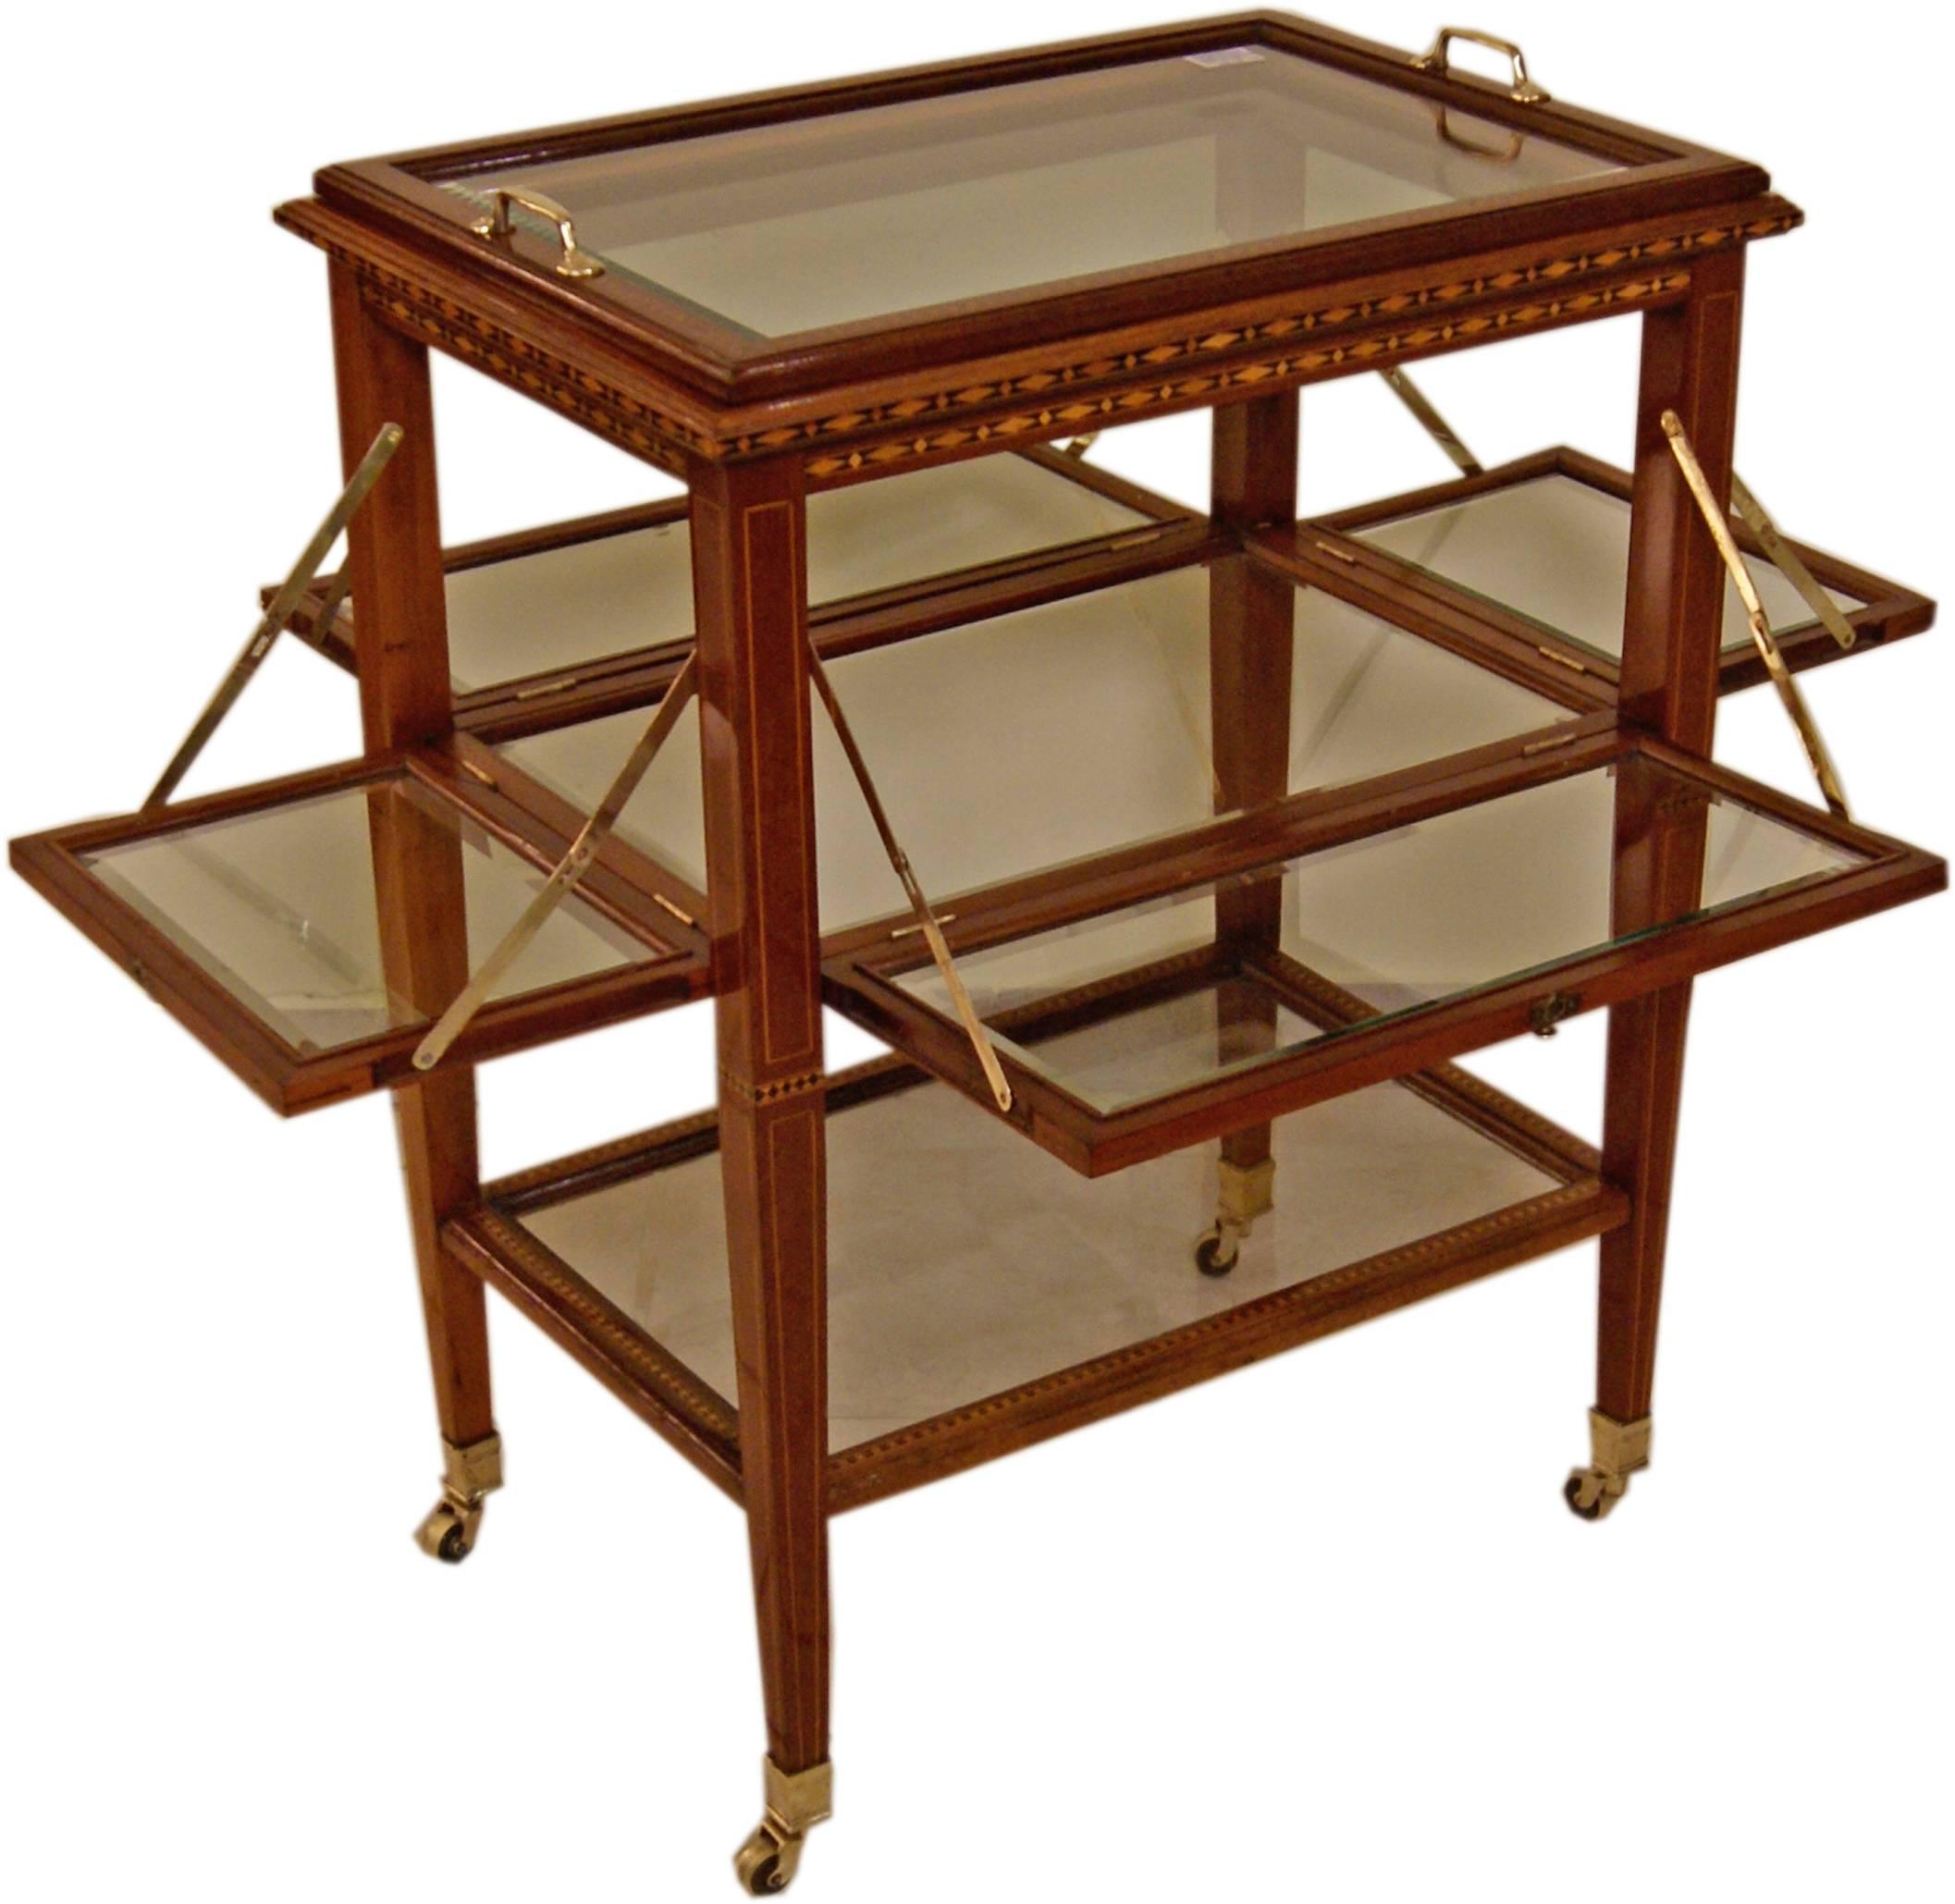 Most elegant Art Nouveau serving trolley or bar cart, Vienna, made circa 1900.
 
Serving trolley of finest manufacturing quality.
Mahogany massive and veneer or refurbished by hand.
Additionally, the bar cart's edges at top part are decorated